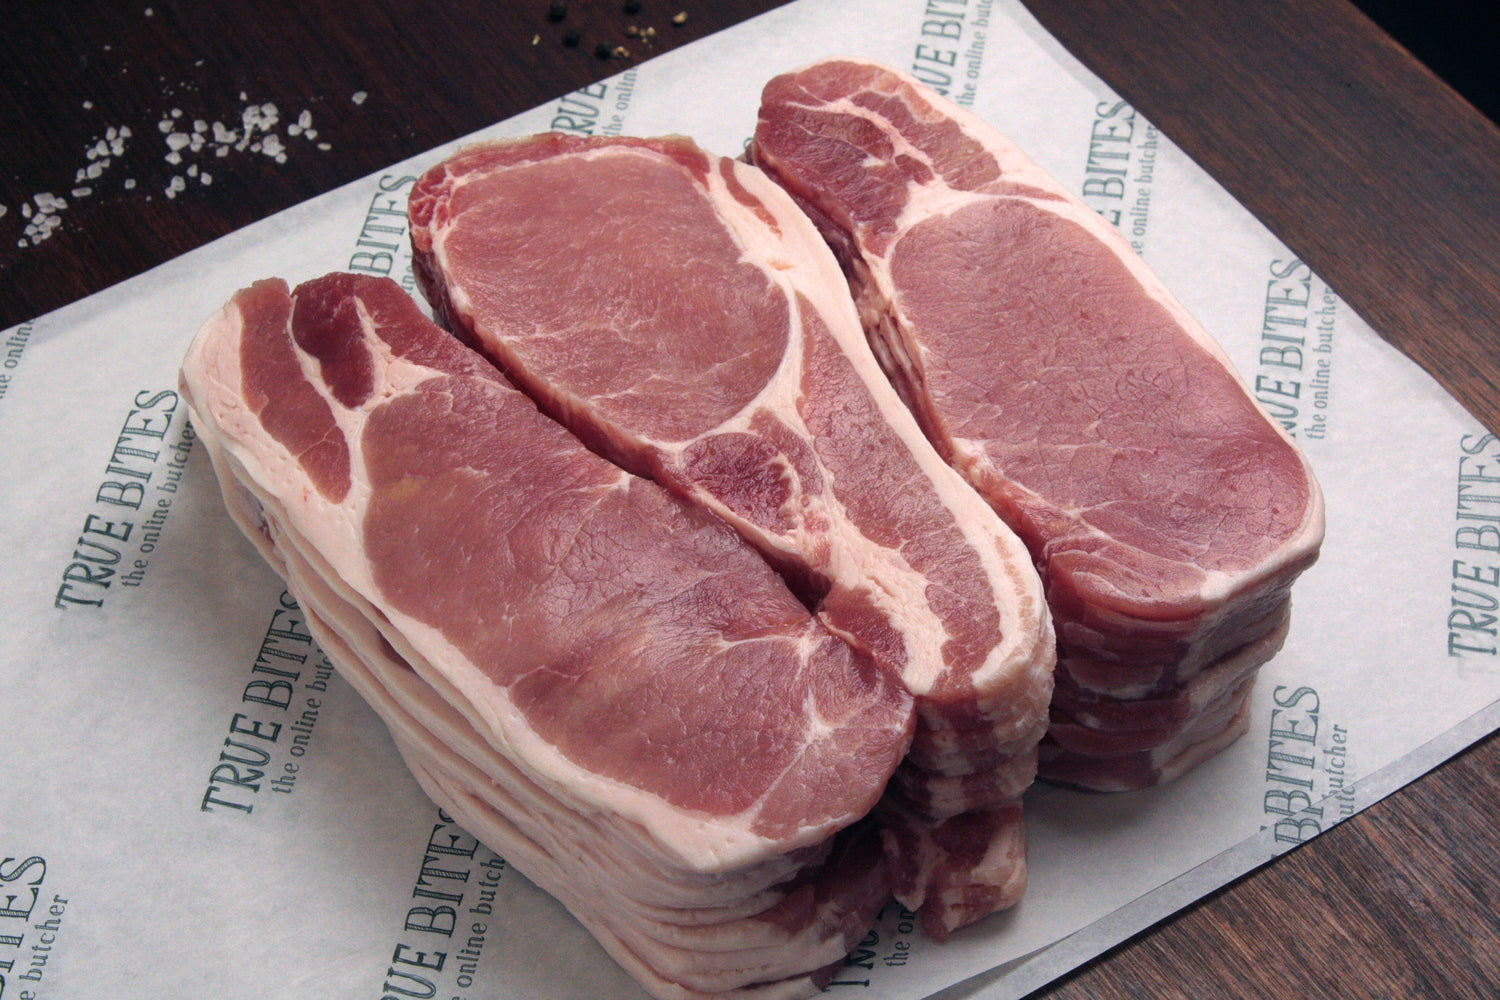 2.27KG of rindless back bacon placed on true bites branded greaseproof paper